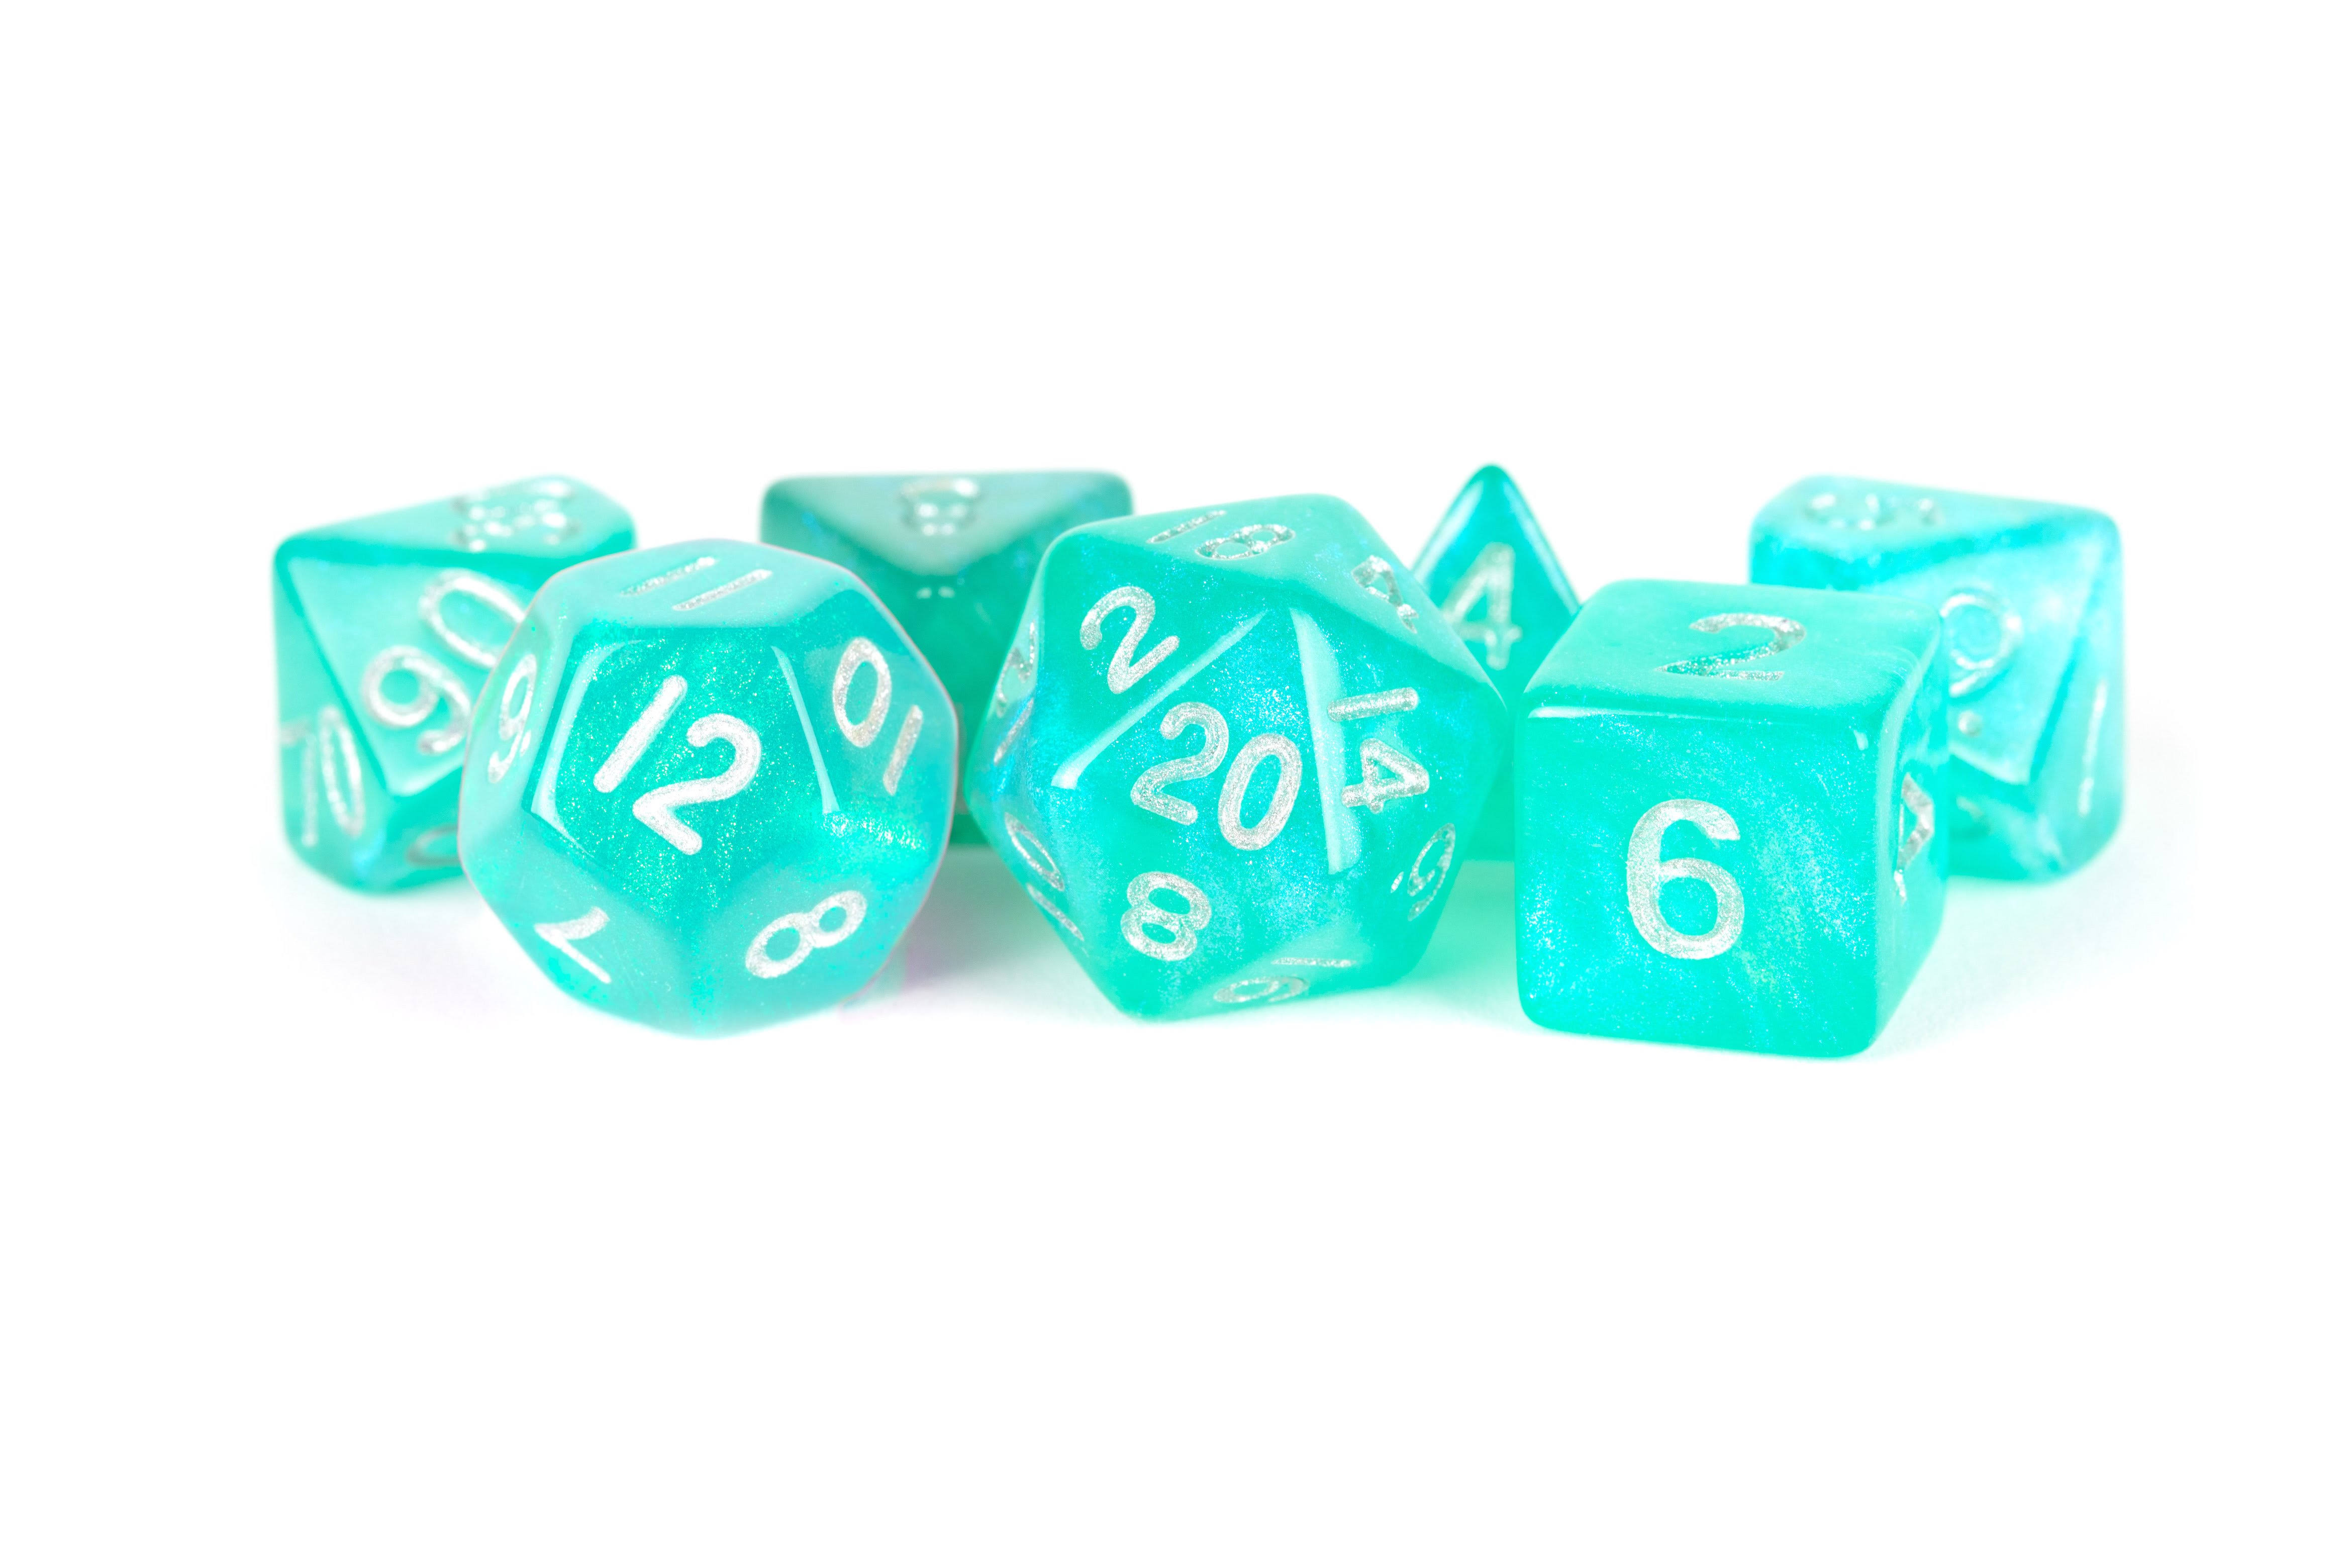 Metallic Dice Games Stardust Turquoise 16mm Acrylic Polyhedral Set